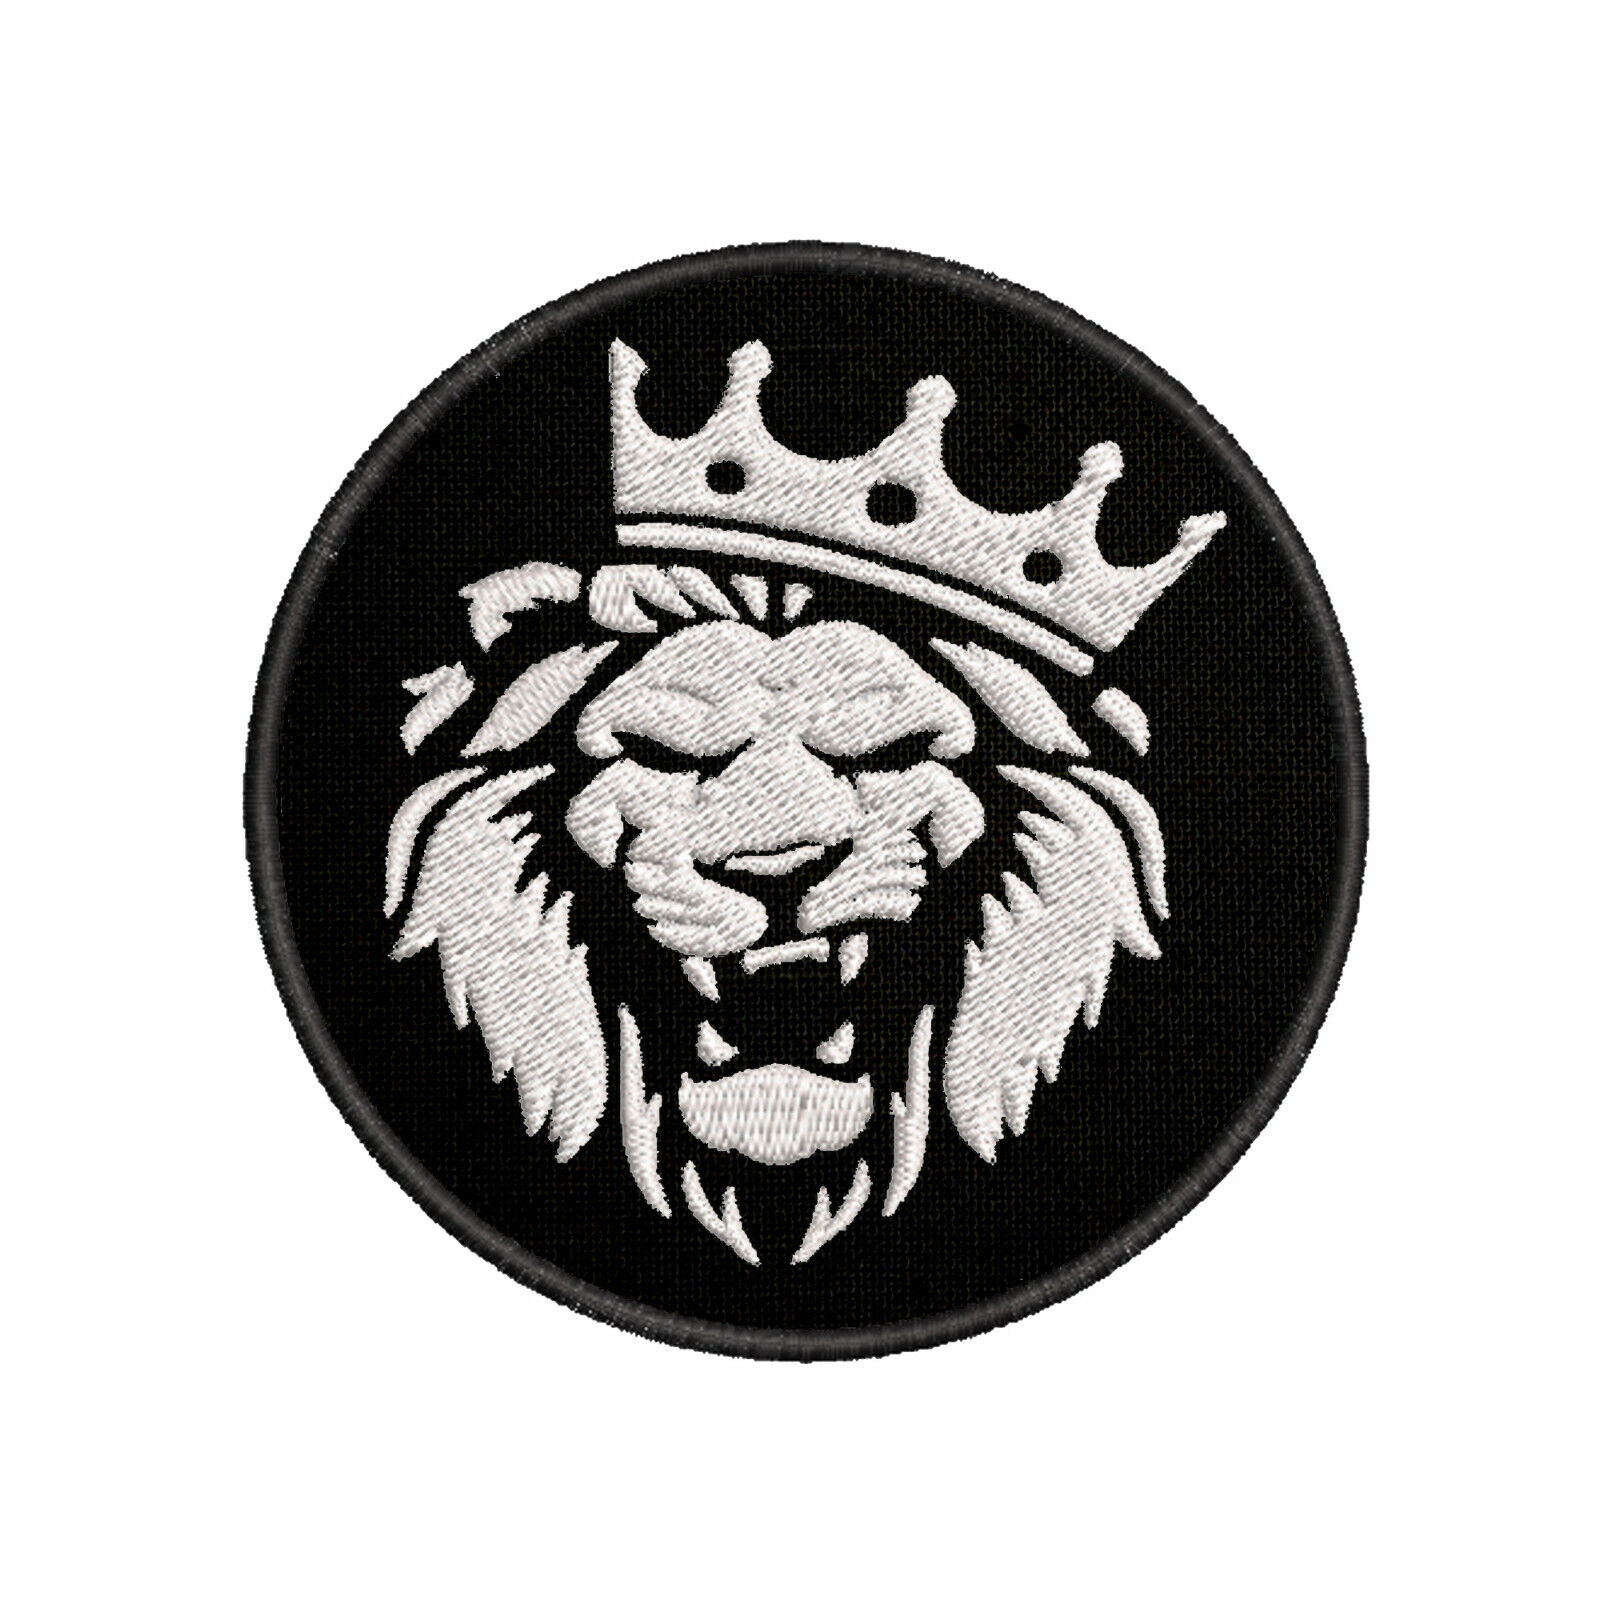 Roaring Lion Patch Embroidered Iron-On Applique for Jacket, King Crown, Animals 